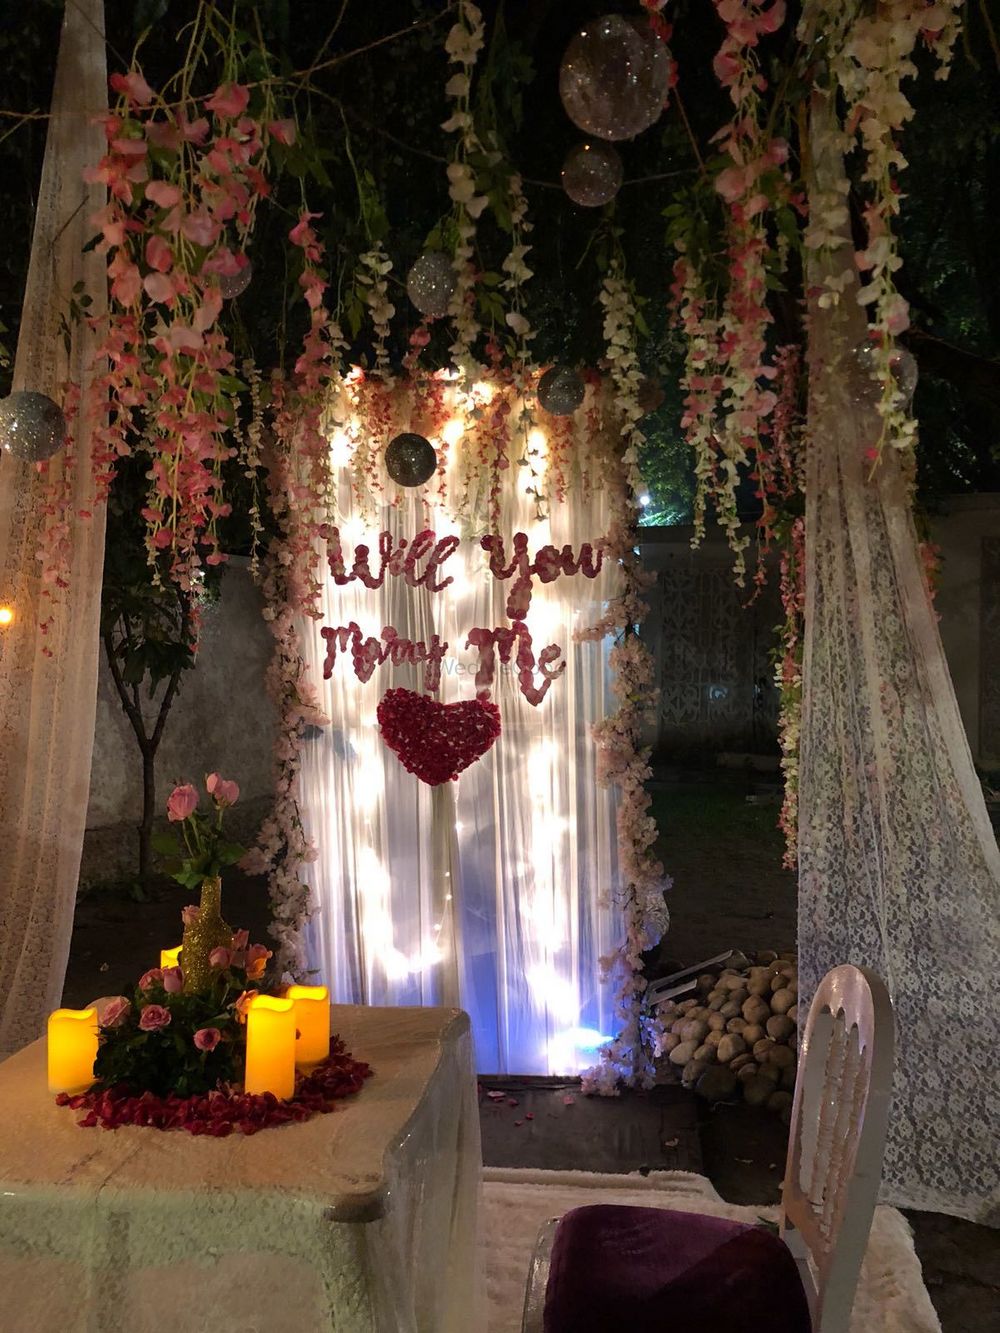 Photo of Cute proposal idea with curtains and flowers